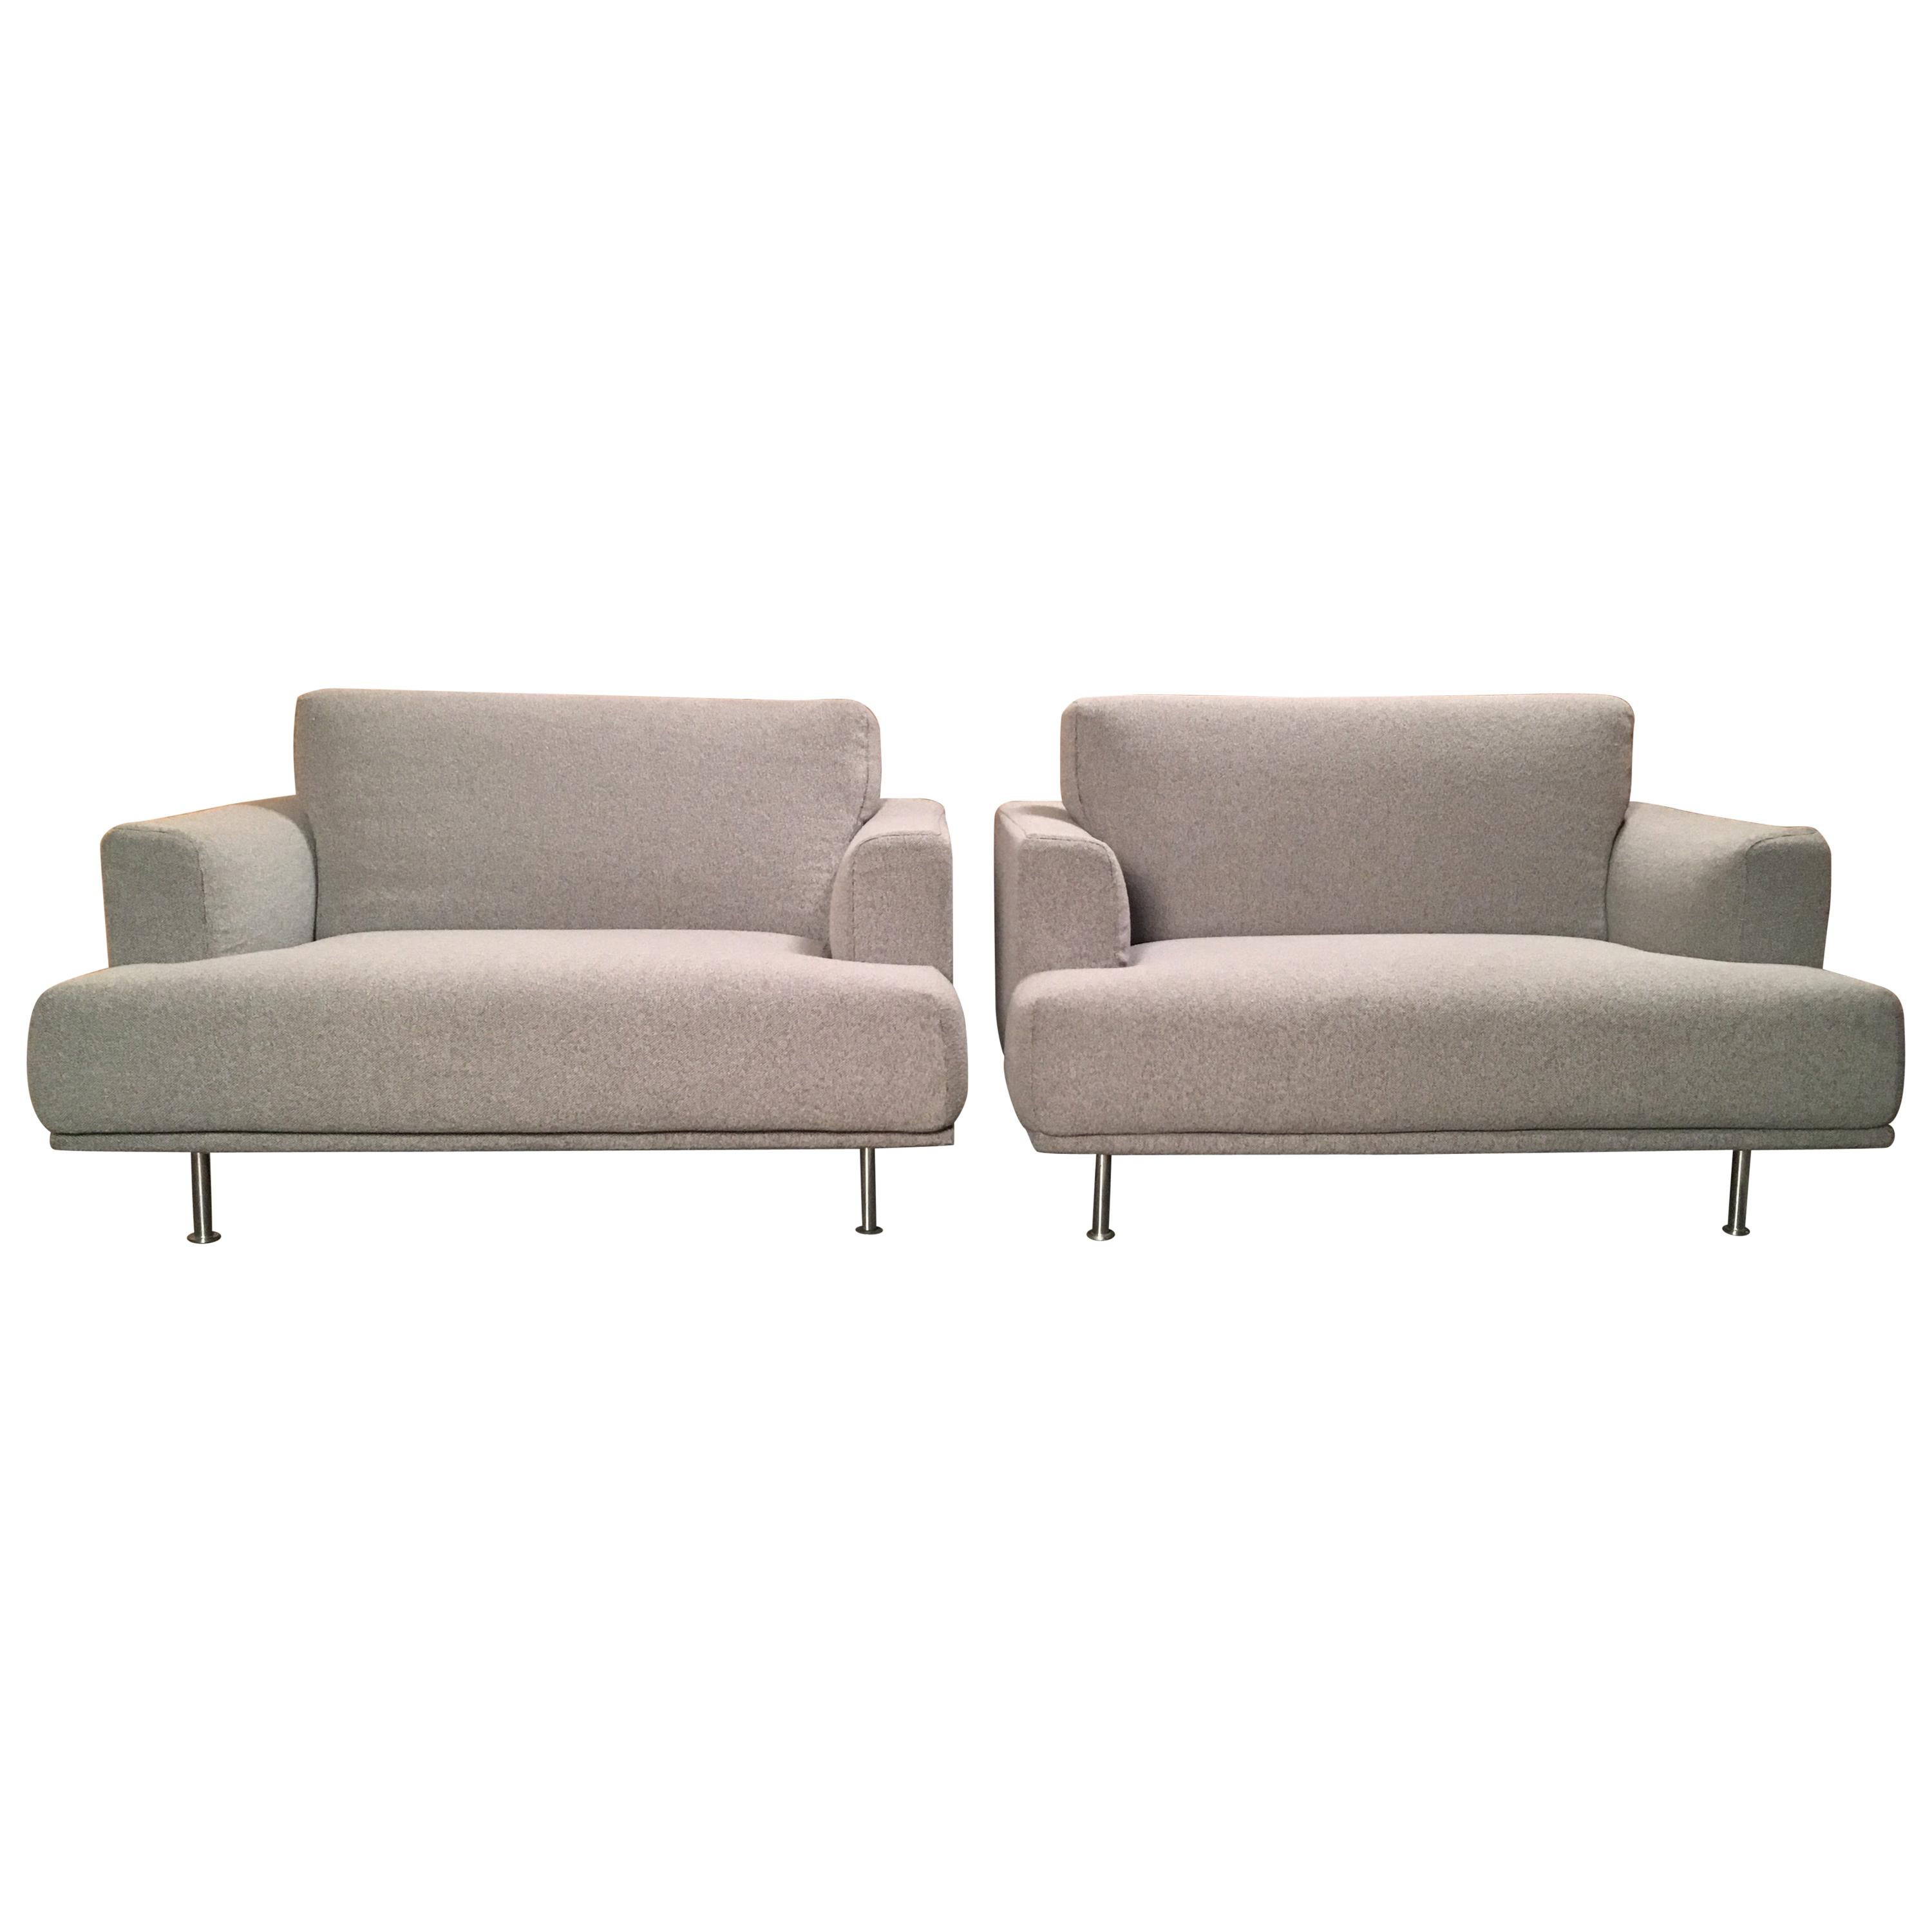 Cassina “253 Nest” Chairs in Grey Wool by Piero Lissoni